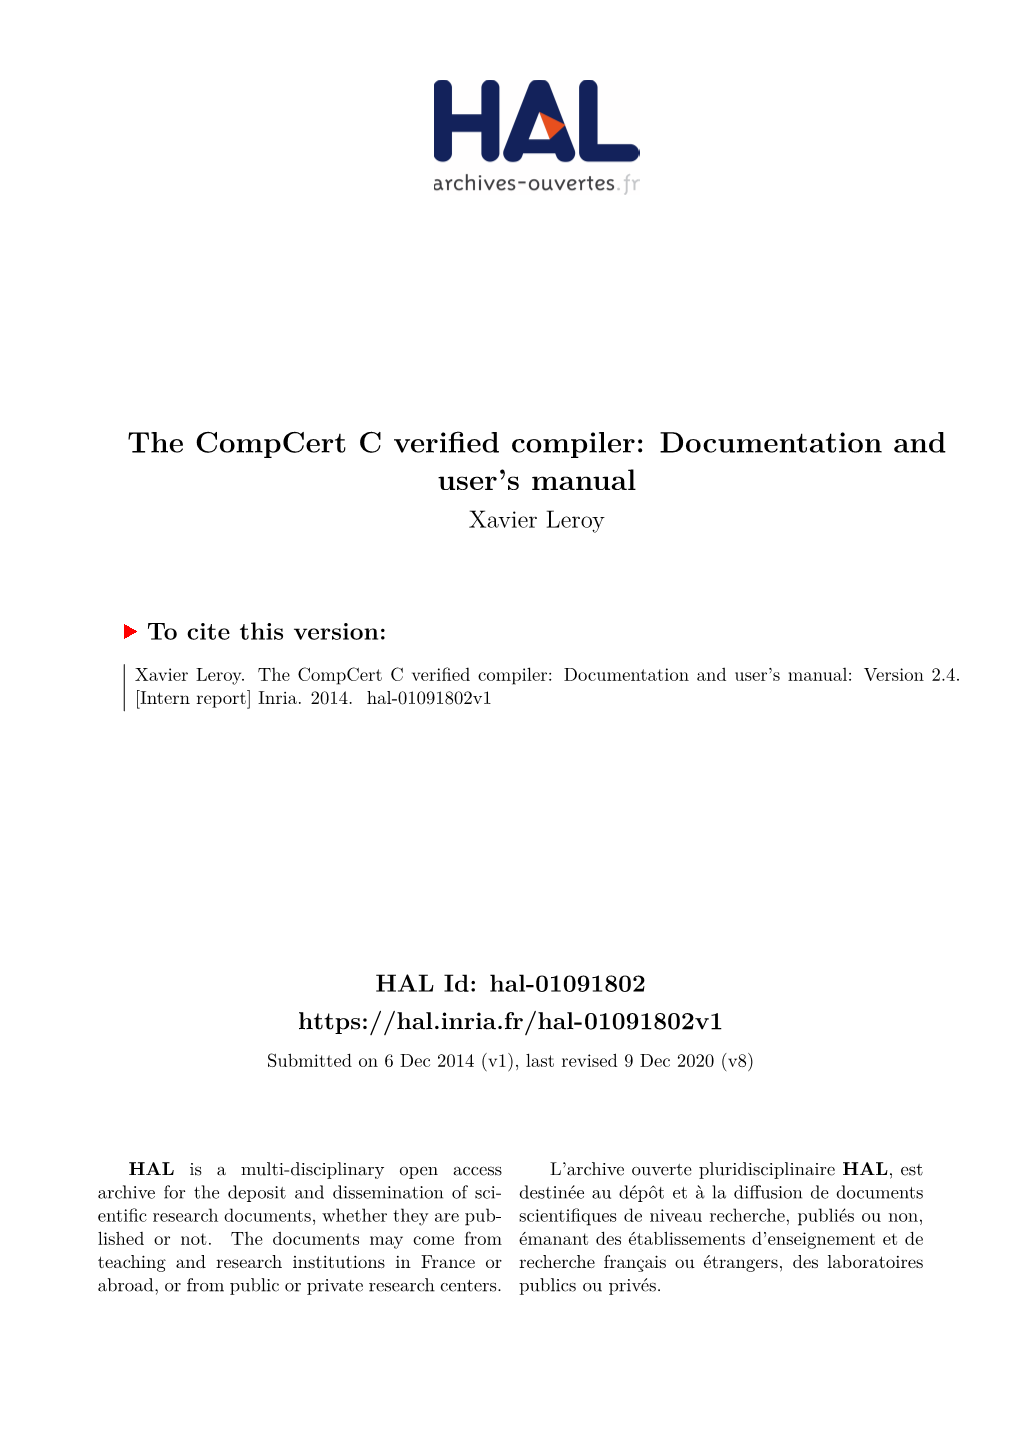 The Compcert C Verified Compiler: Documentation and User's Manual